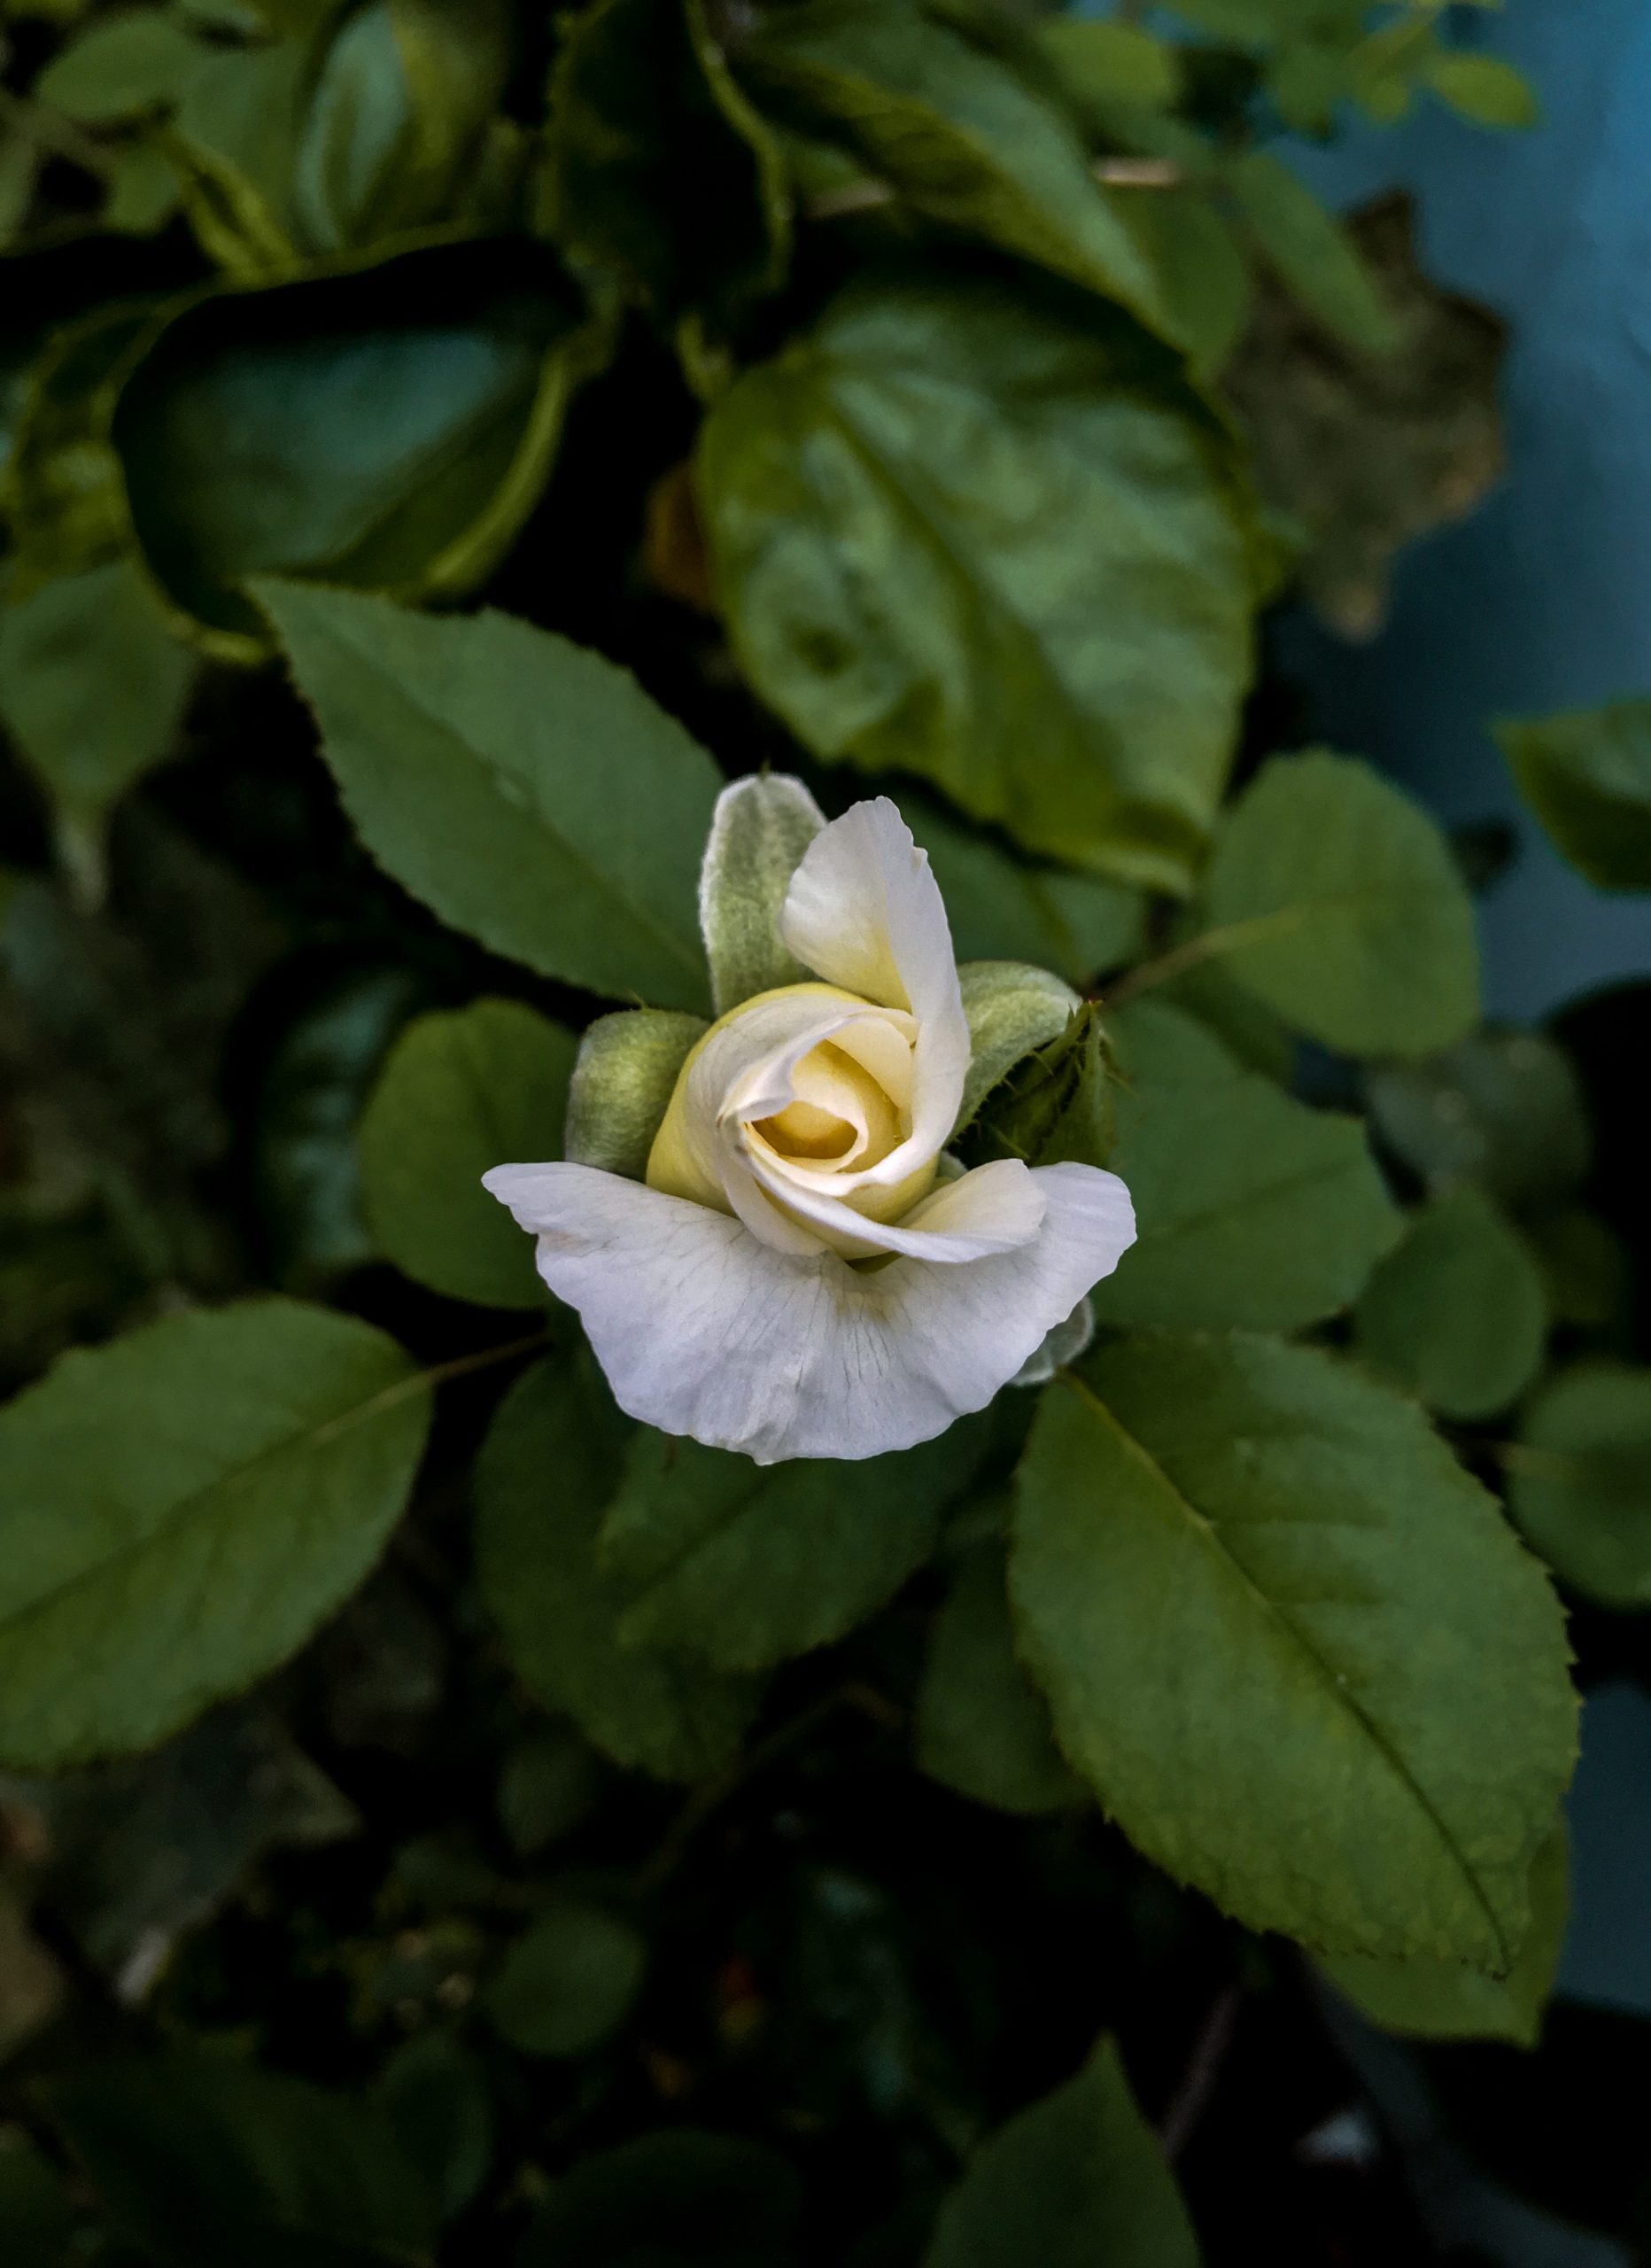 Close-up shot of white rose and green leaves